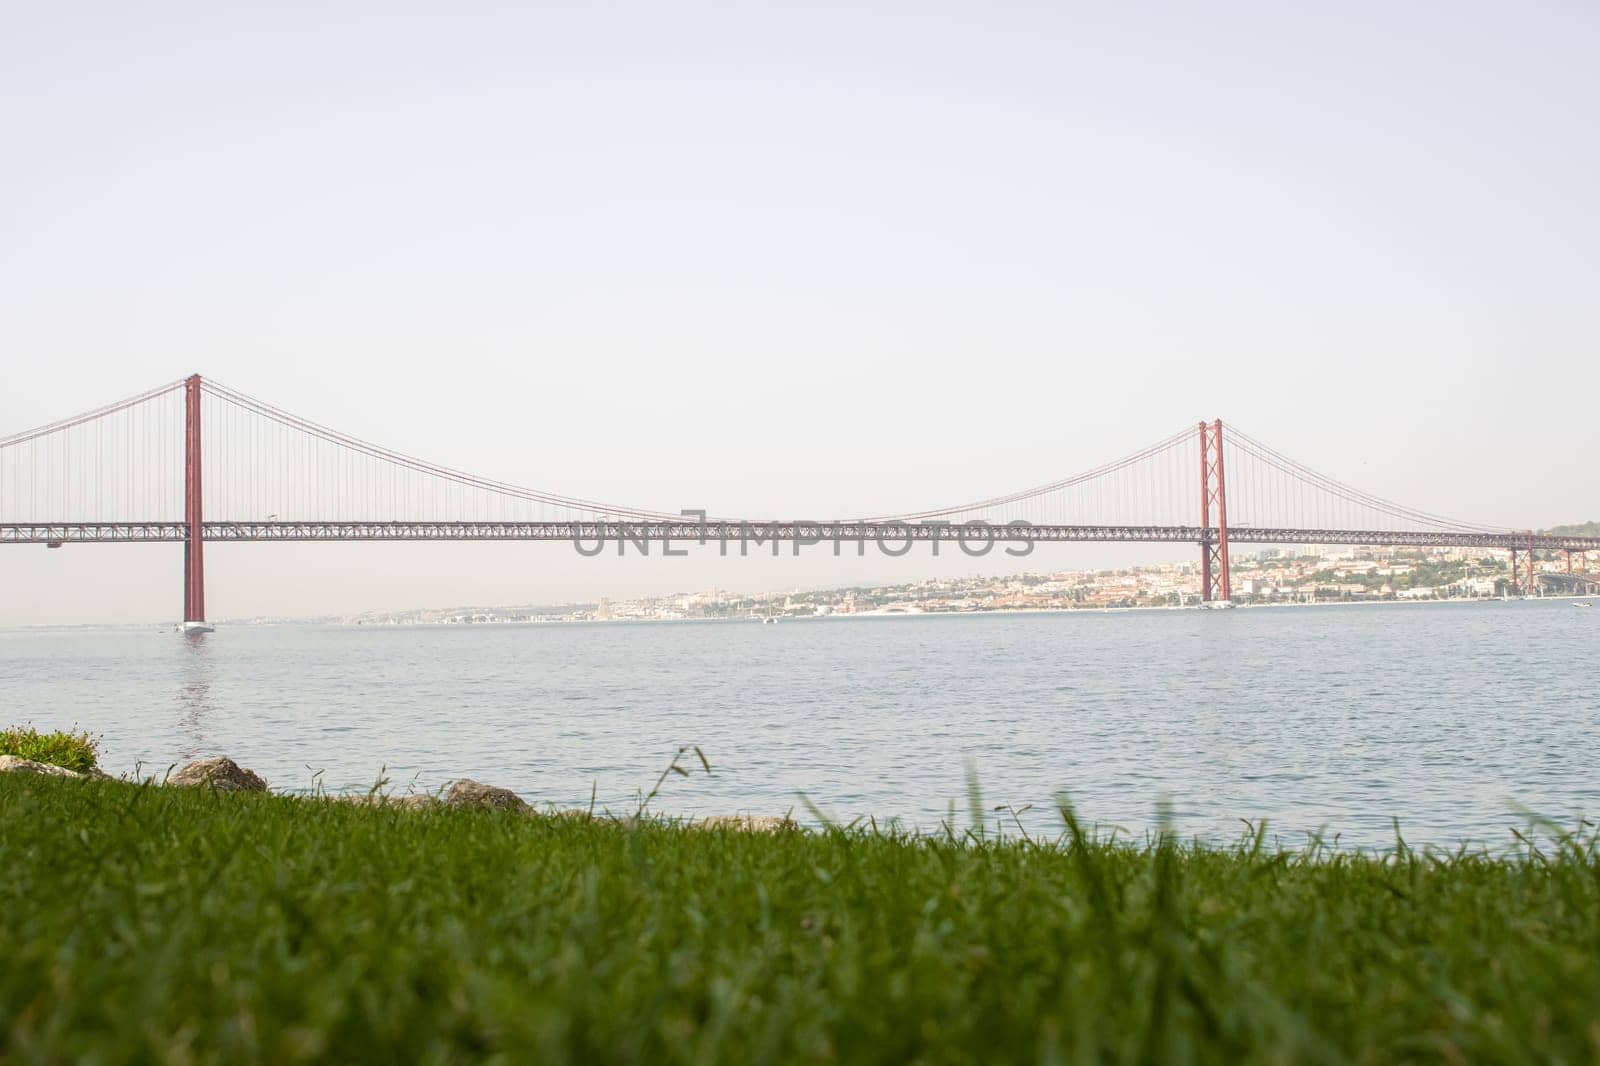 Bridge of 25 april - view of Lisboa Harbor with vessels and Port cranes by Studia72